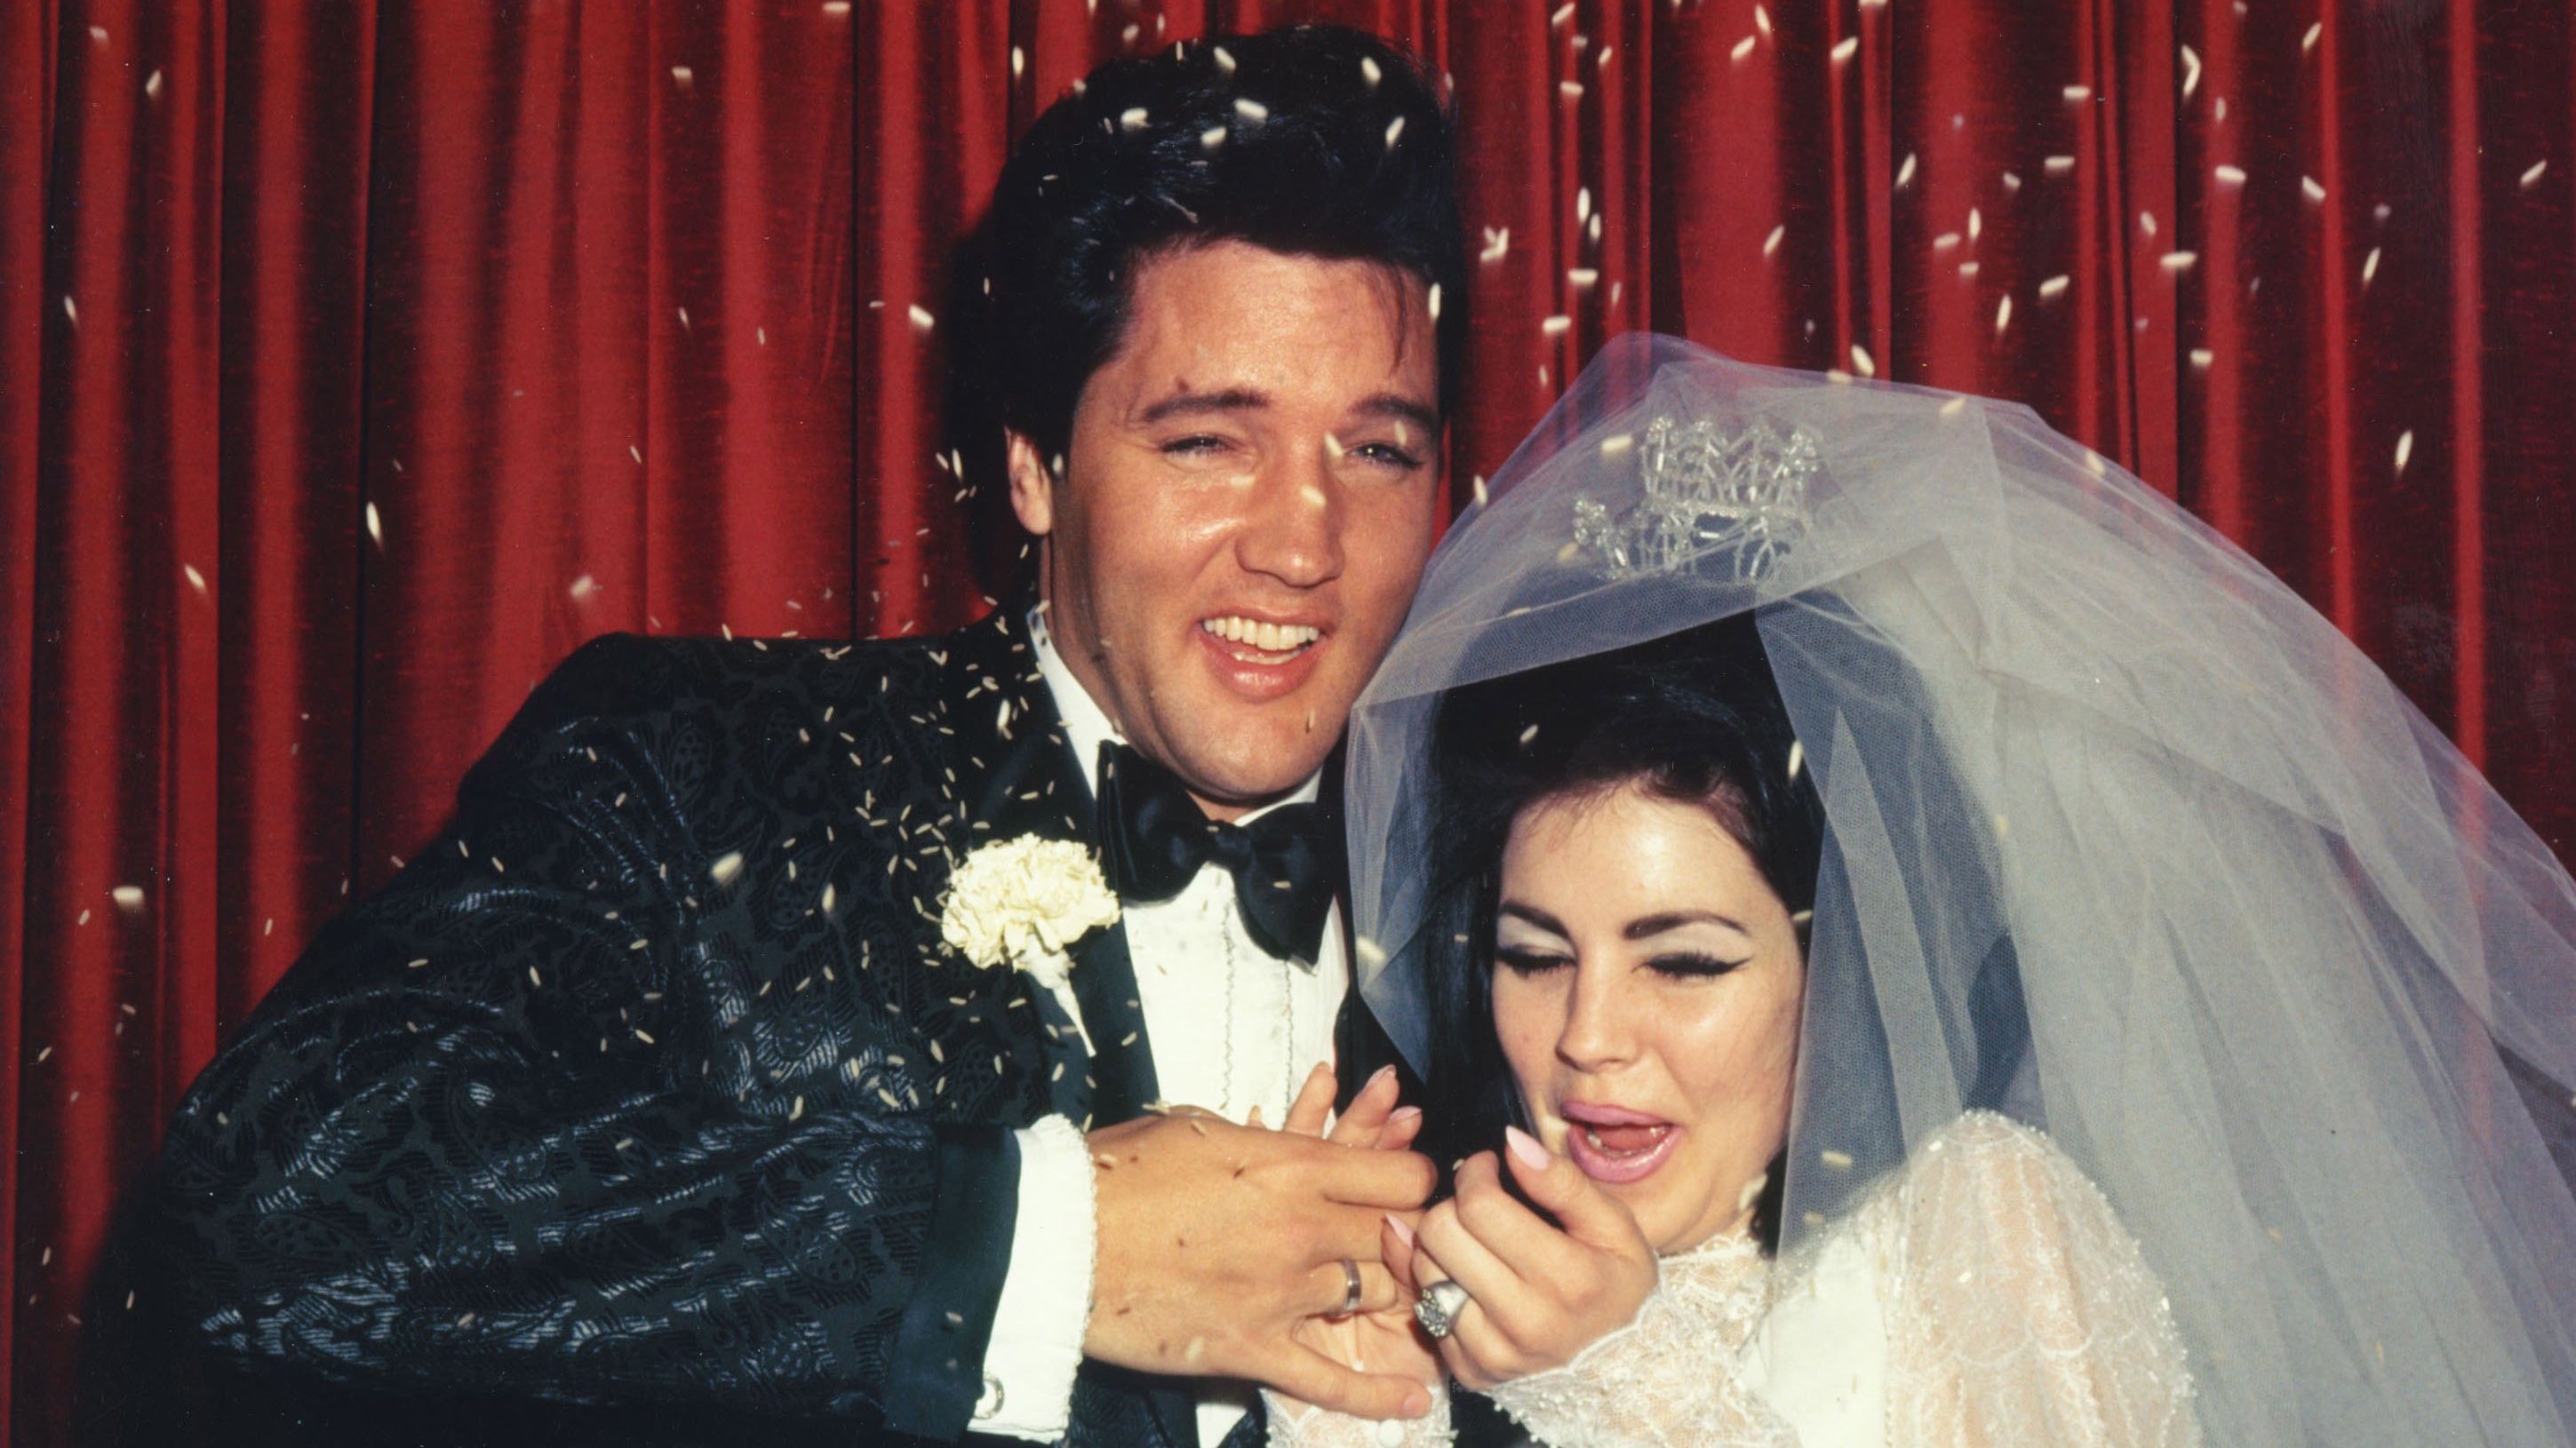 Priscilla Presley Didn't Like Wedding Dress She Wore to Marry